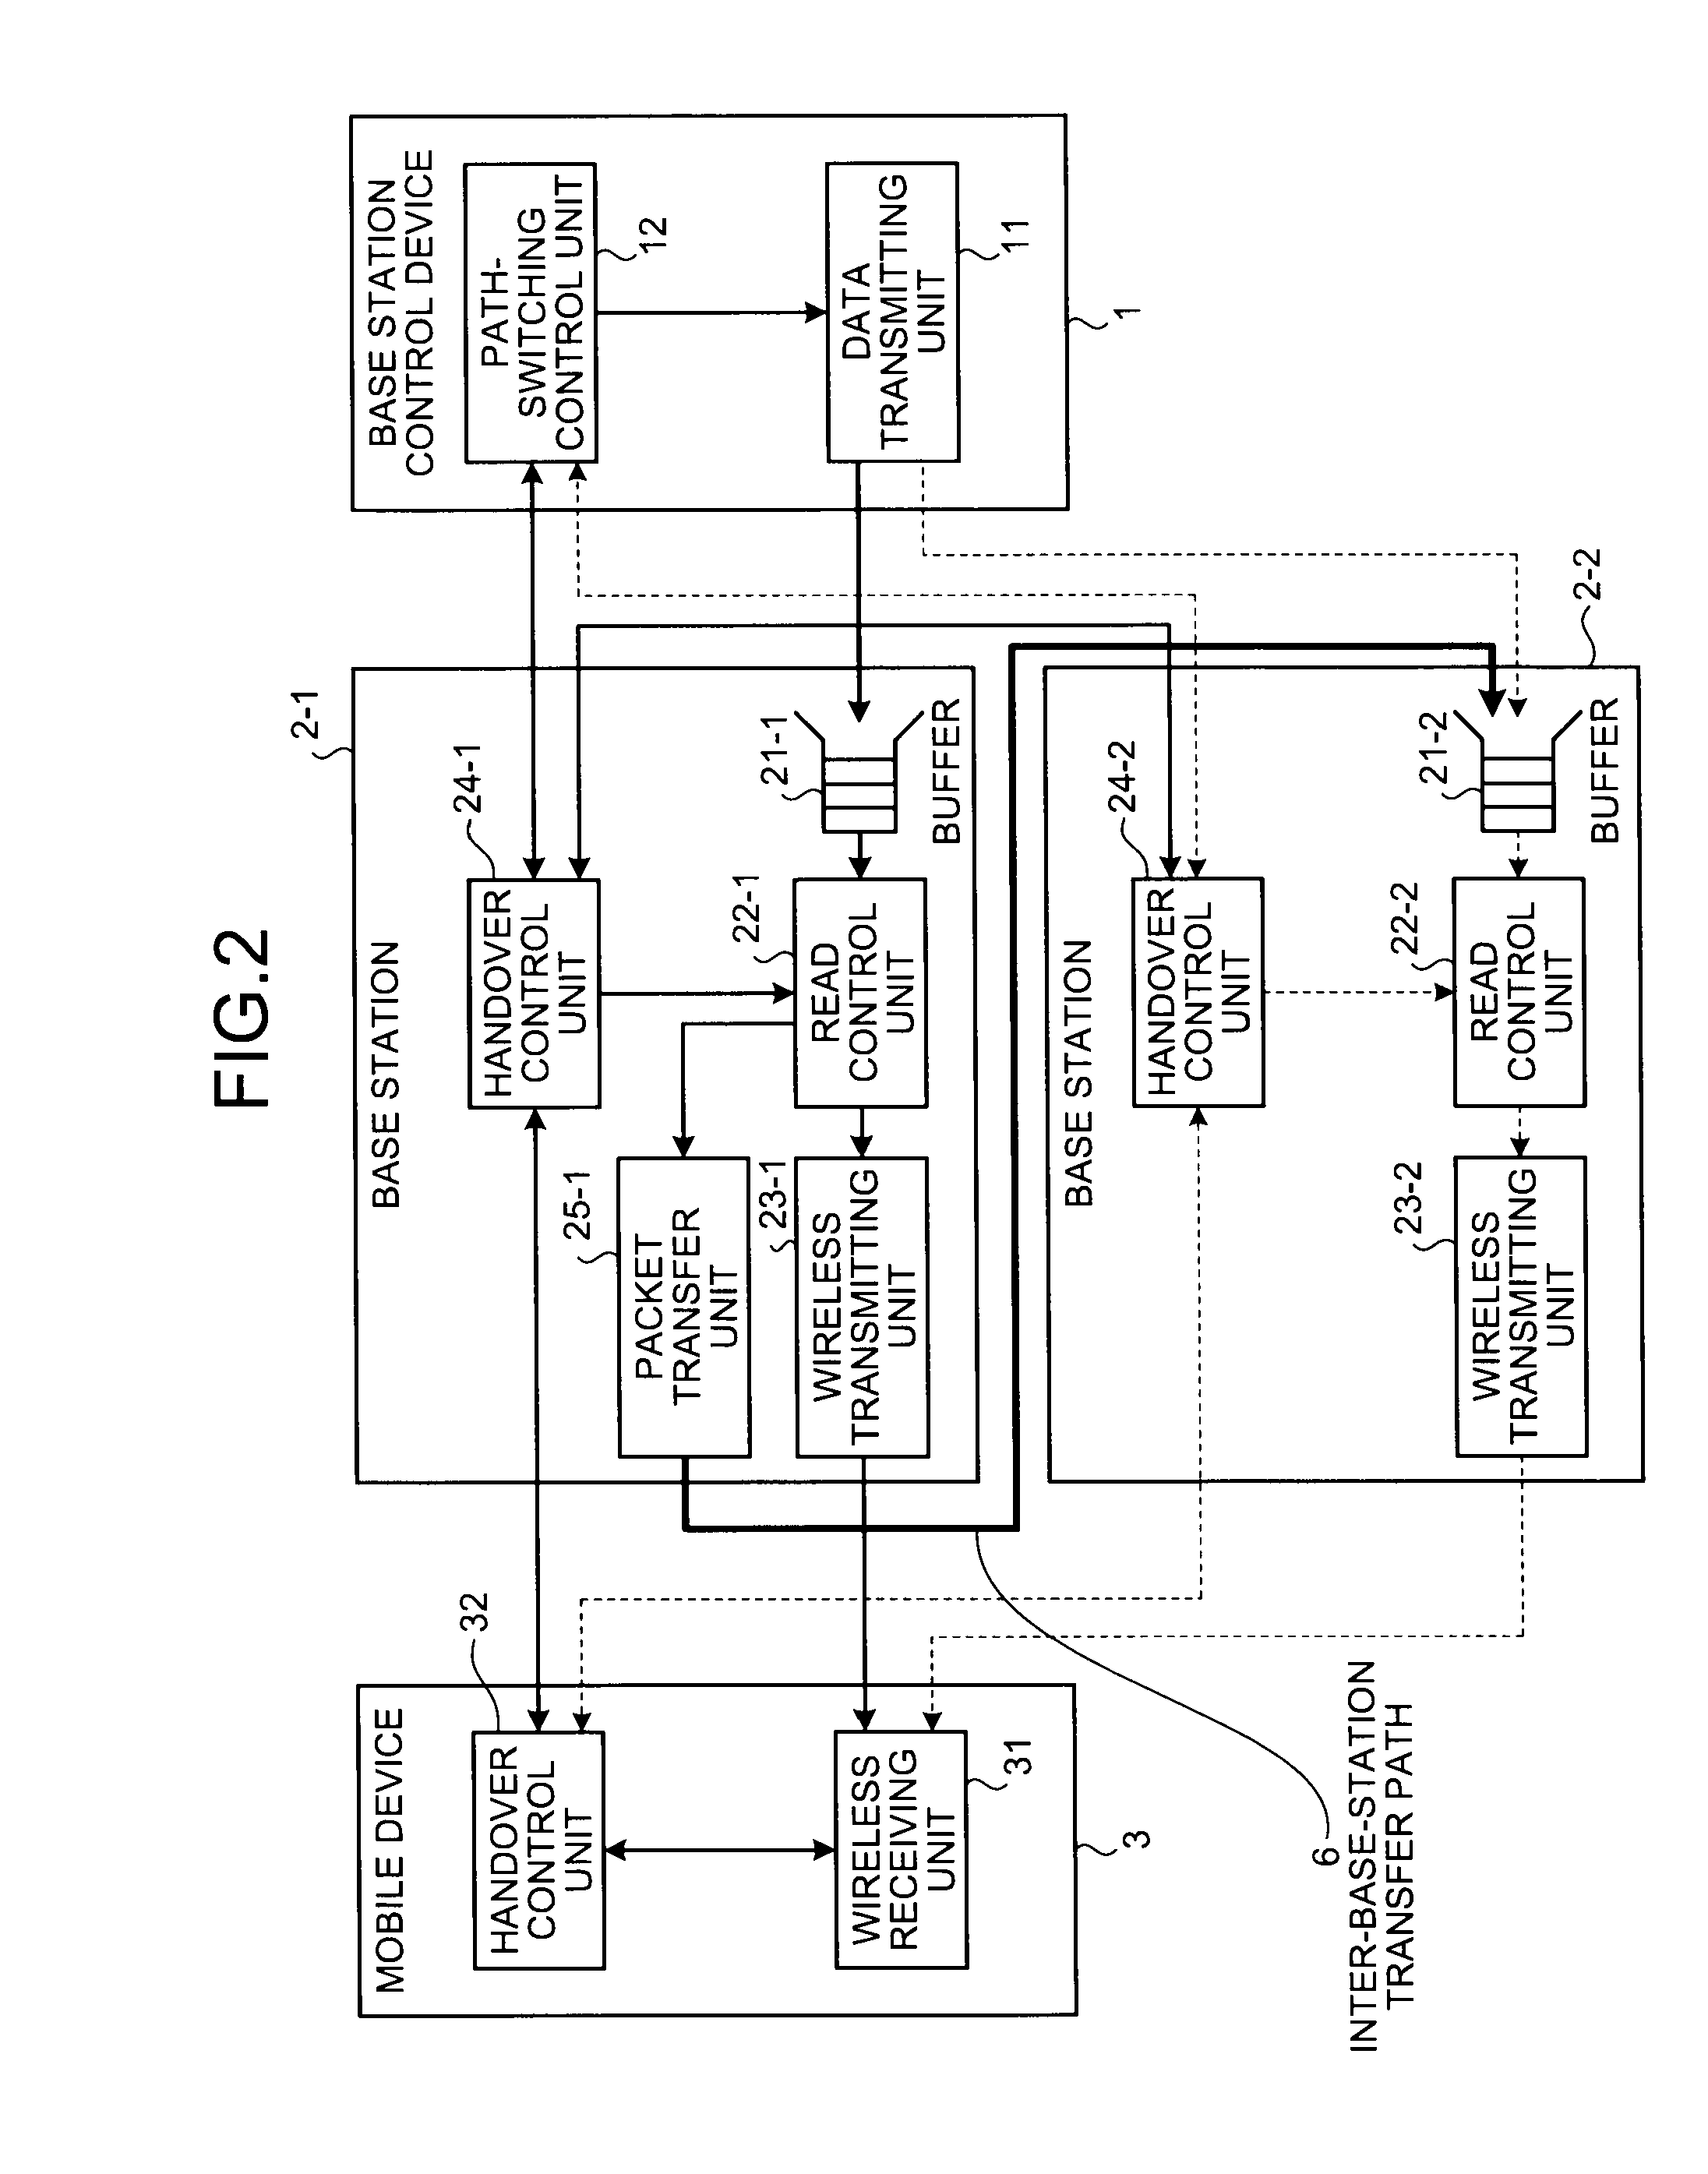 Packet priority control method and base station